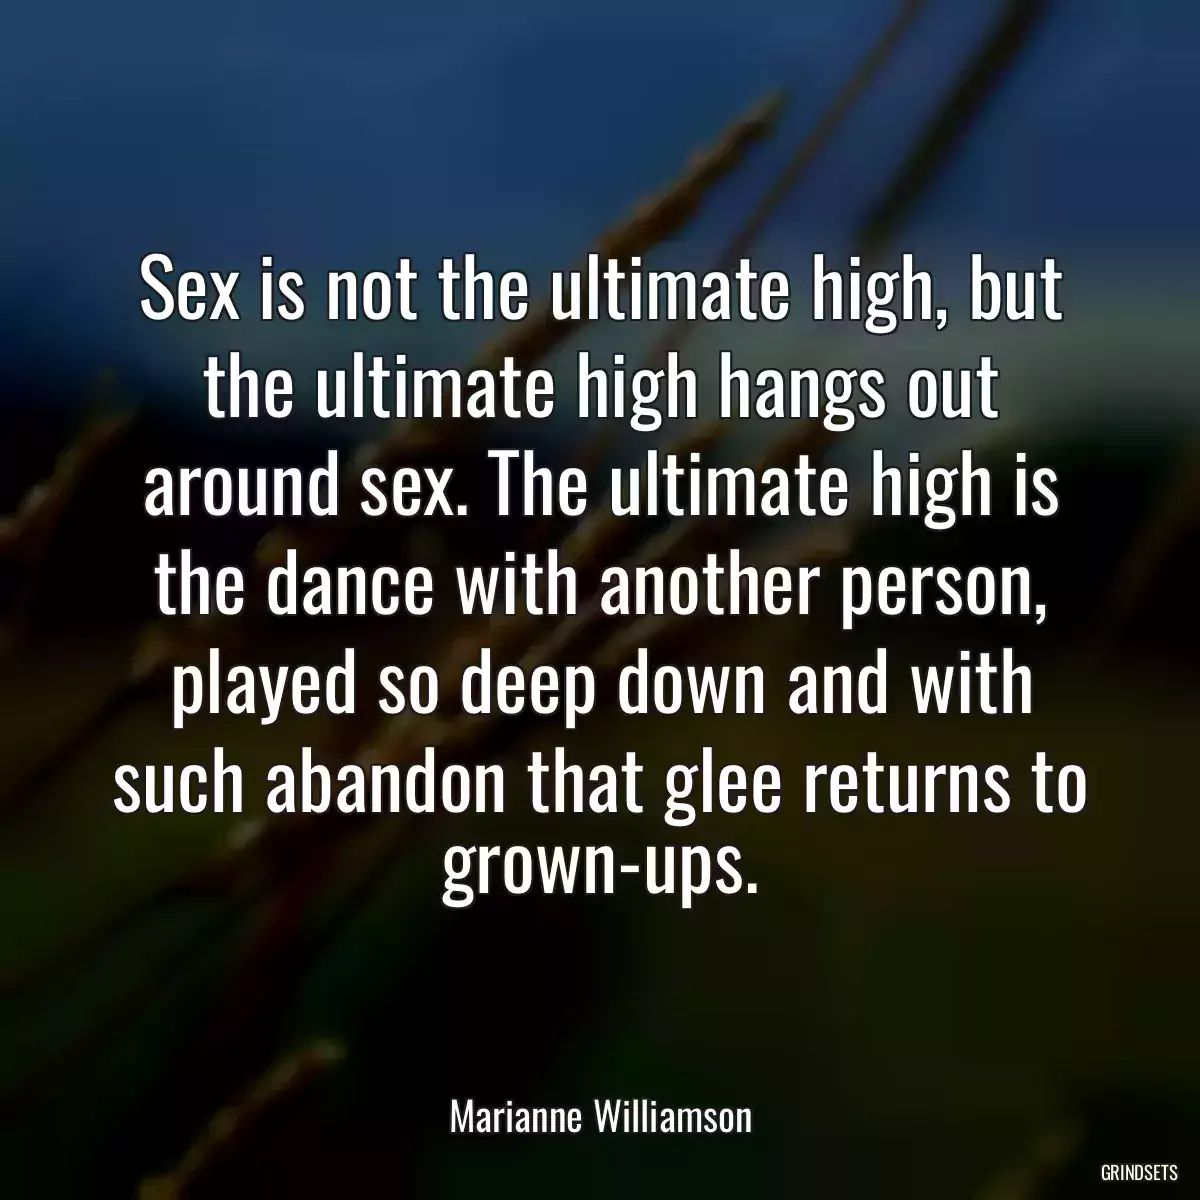 Sex is not the ultimate high, but the ultimate high hangs out around sex. The ultimate high is the dance with another person, played so deep down and with such abandon that glee returns to grown-ups.